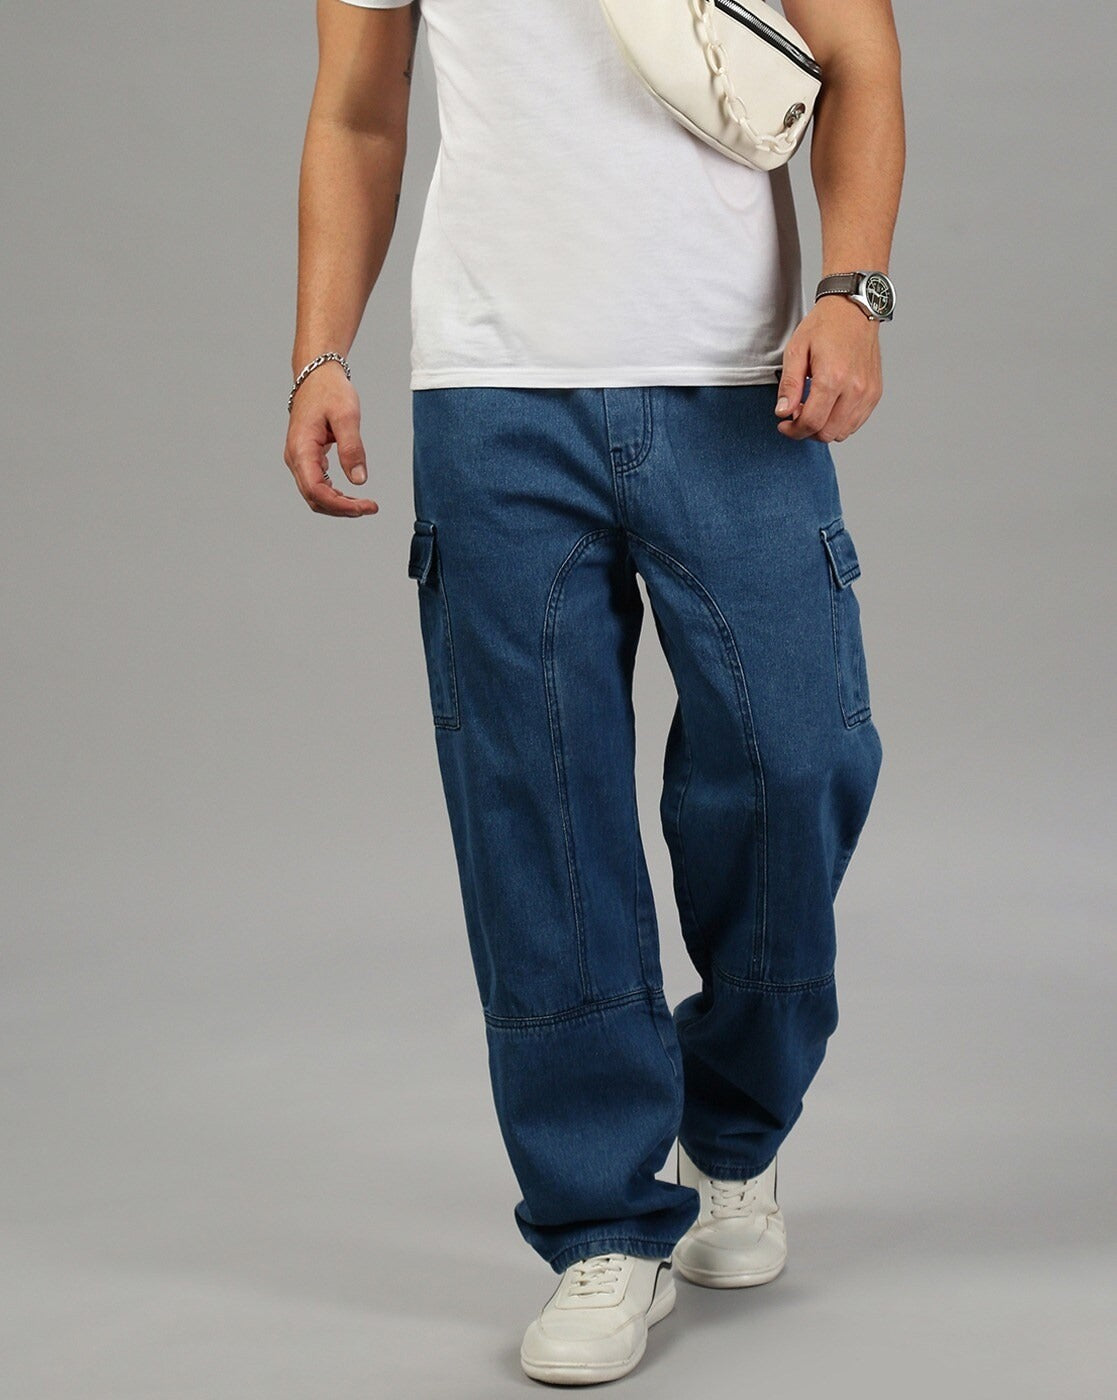 Relax Fit Jogger with elasticated Waist